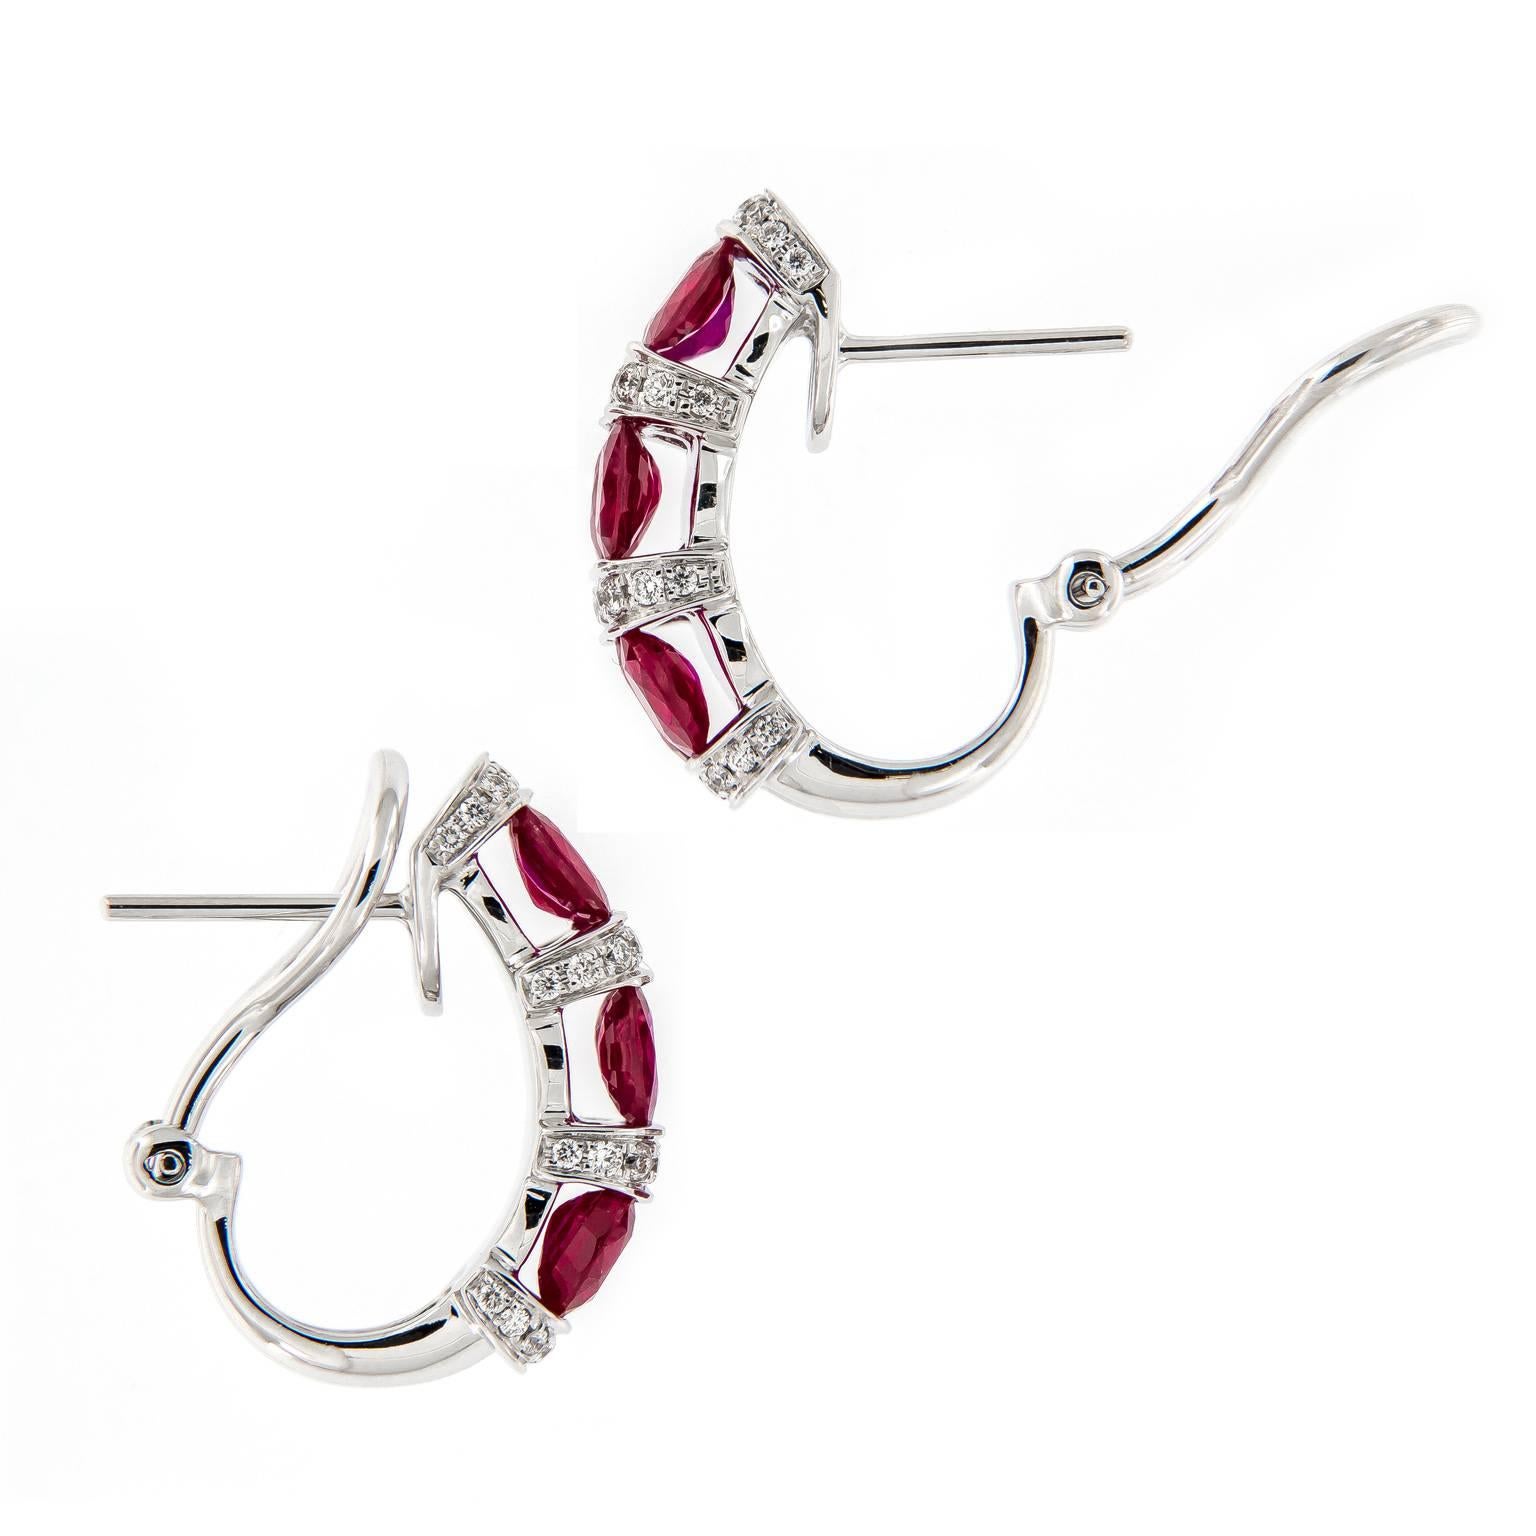 Alternate rows of contrasting mixture of oval rubies and pave set diamonds create a stunning look. Earrings are crafted in 18k white gold with Omega backs.

Rubies 4.51 cttw
Diamonds 0.50 cttw